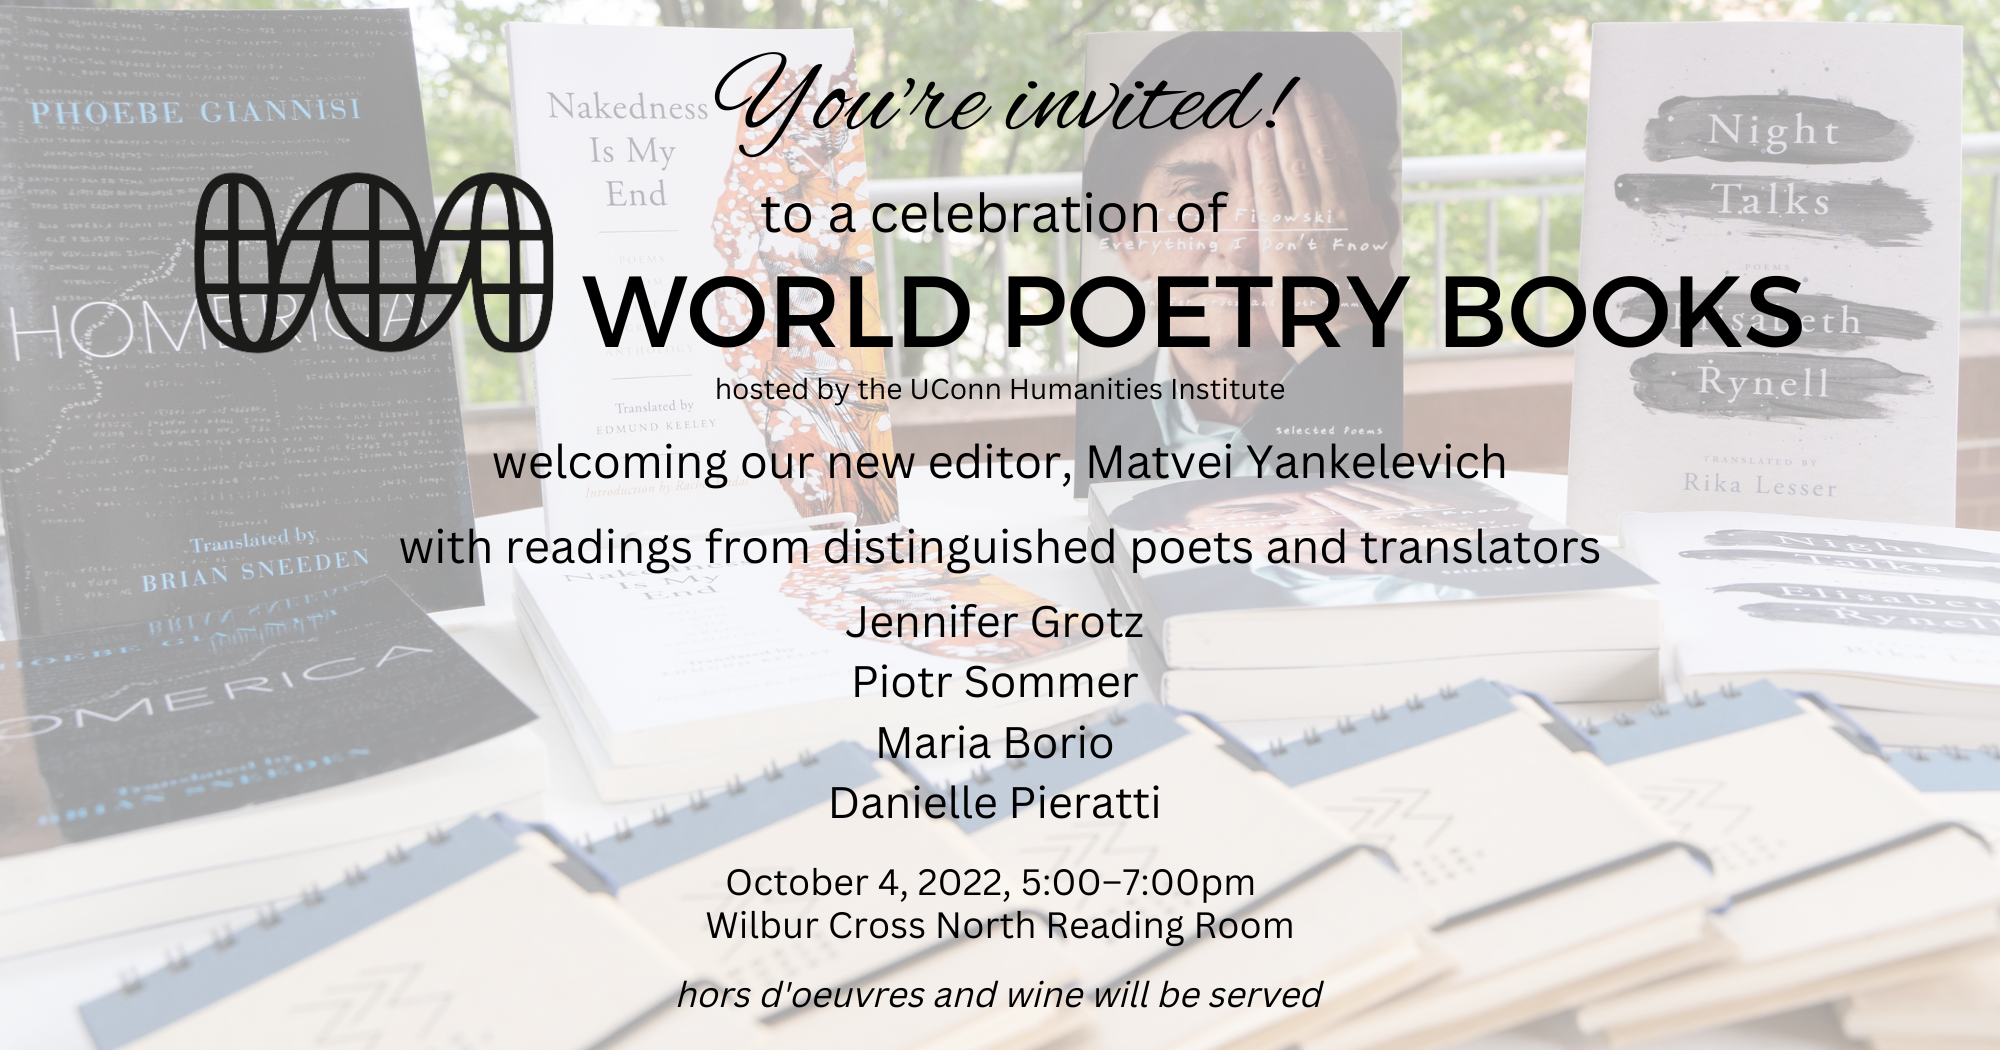 You're invited to a celebration of World Poetry Books, welcoming our new editor, Matvei Yankelevich with readings from distinguished poets and translators Jennifer Grotz Piotr Sommer Maria Borio Danielle Pieratti hosted by the UConn Humanities Institute October 4, 2022, 5:00–7:00pm Wilbur Cross North Reading Room. Hors d'oeuvres and wine will be served.